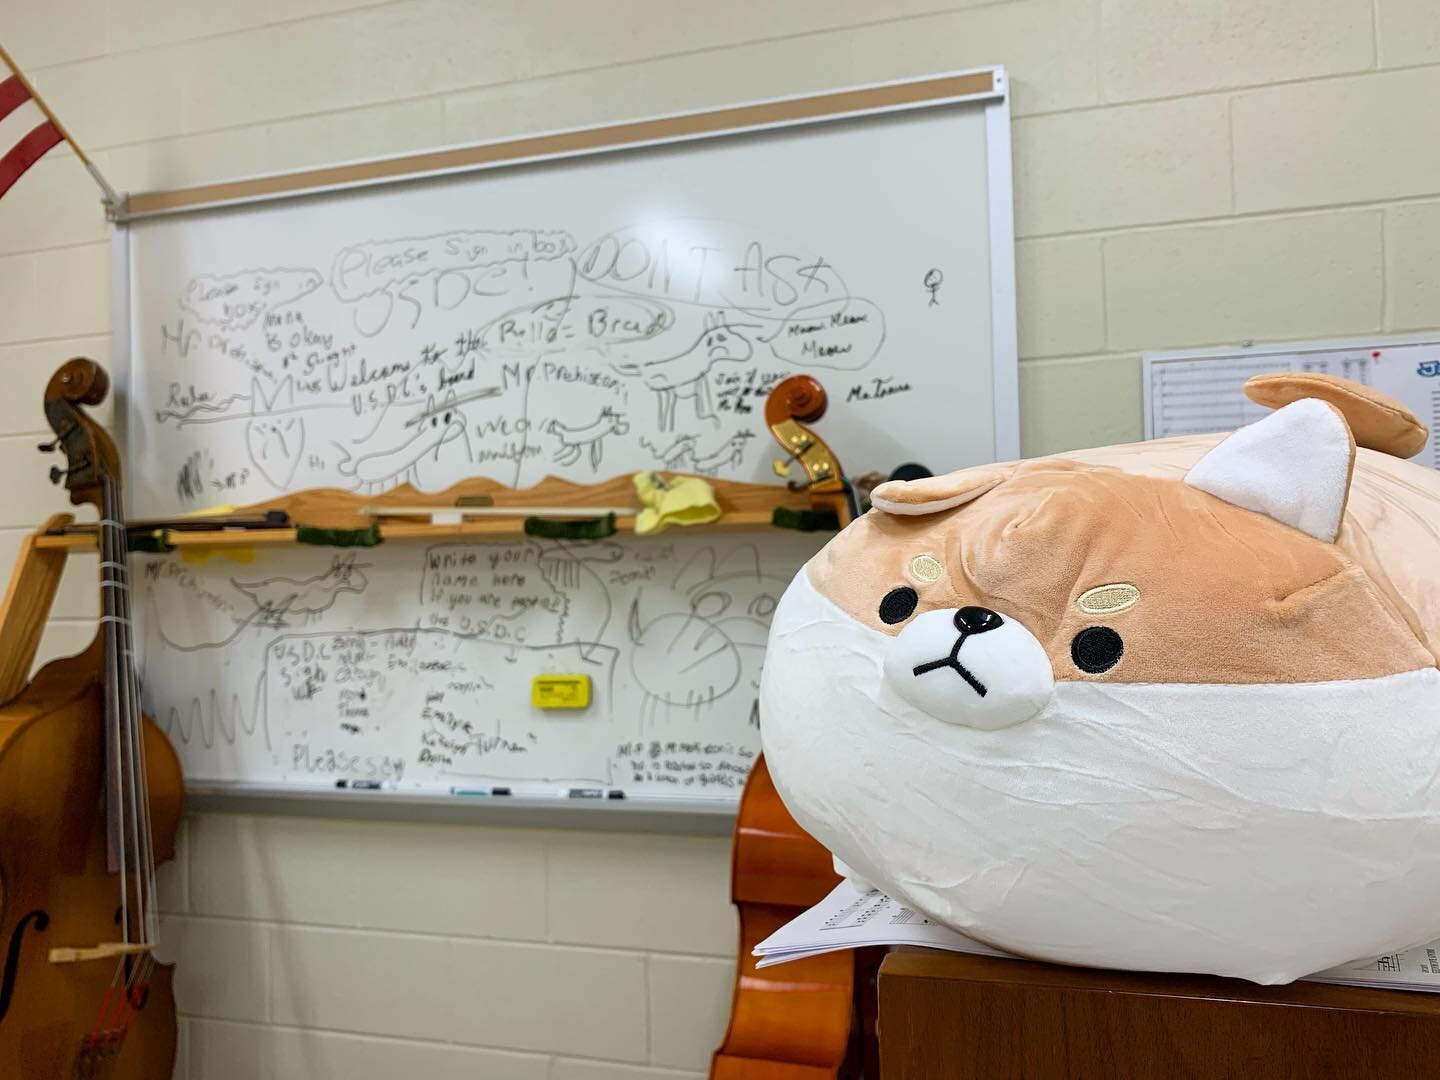 Meet Leeeeee the Shiba Inu.

Over the course of the past month, what started as a drawing on my whiteboard turned into our orchestra mascot. One of my students attempted to draw a dog. I asked why it looked like it had six legs and a unibrow. Instead